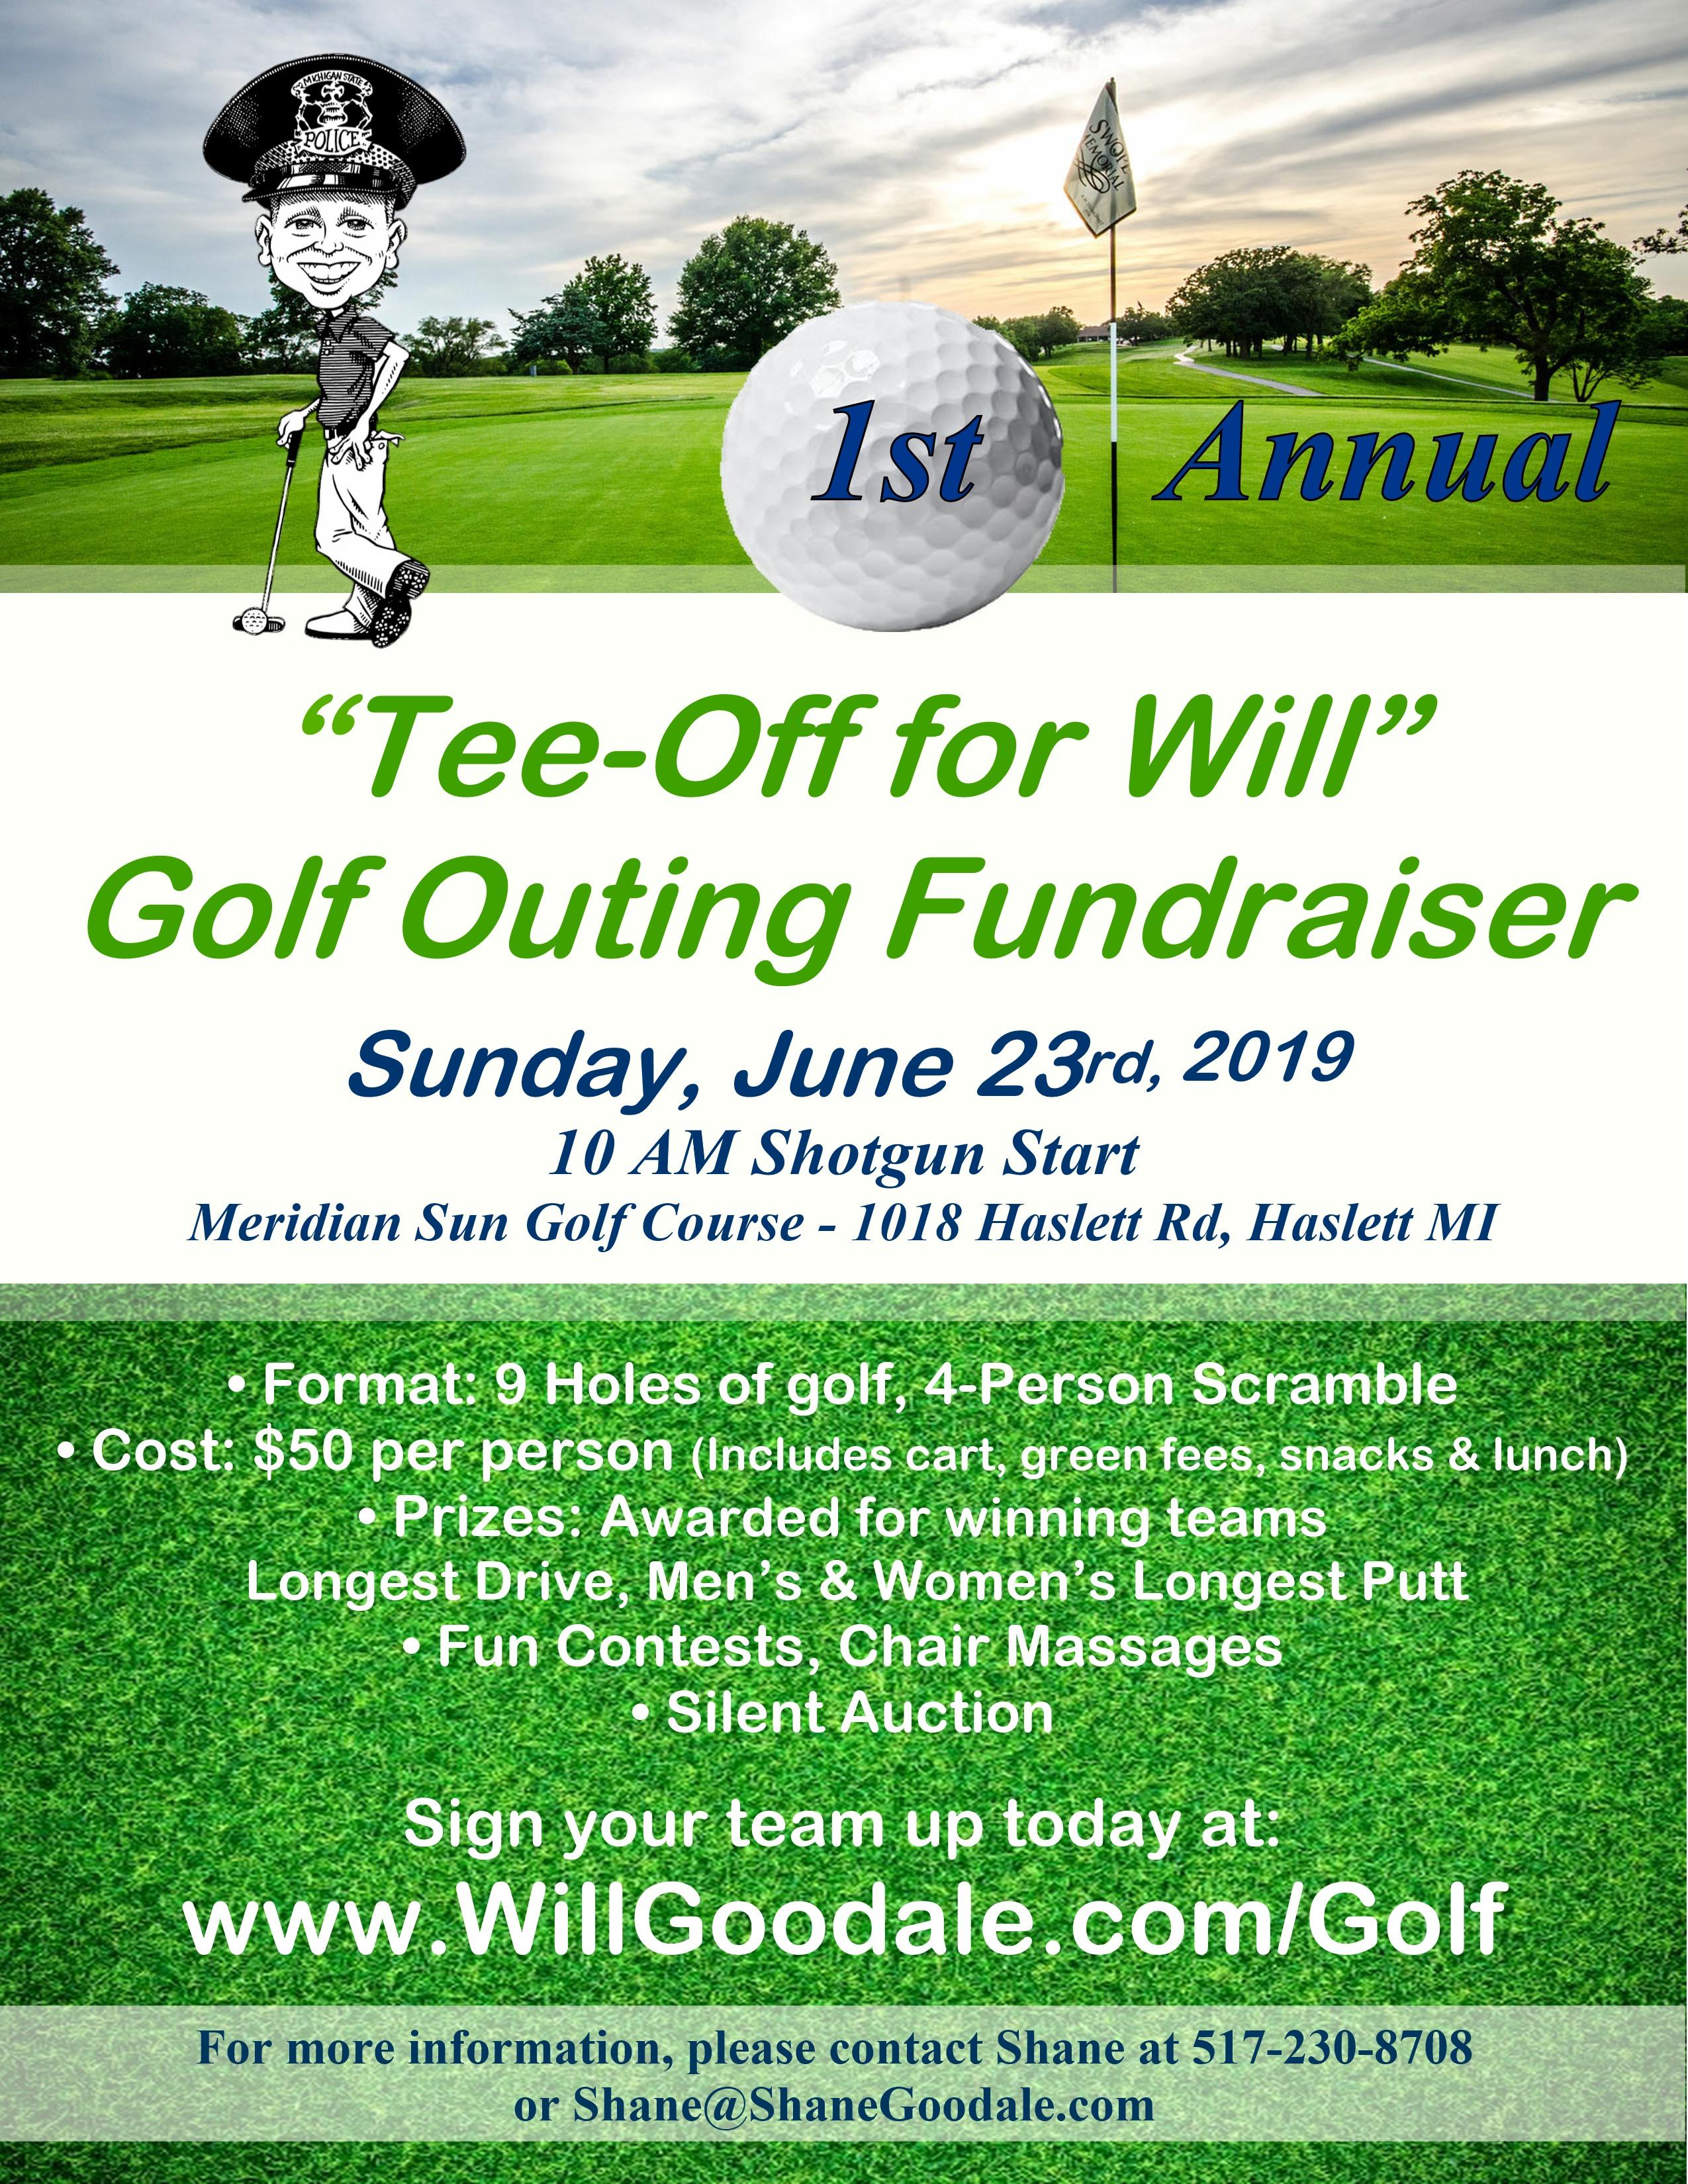 Tee-Off for Will Golf Fundraiser